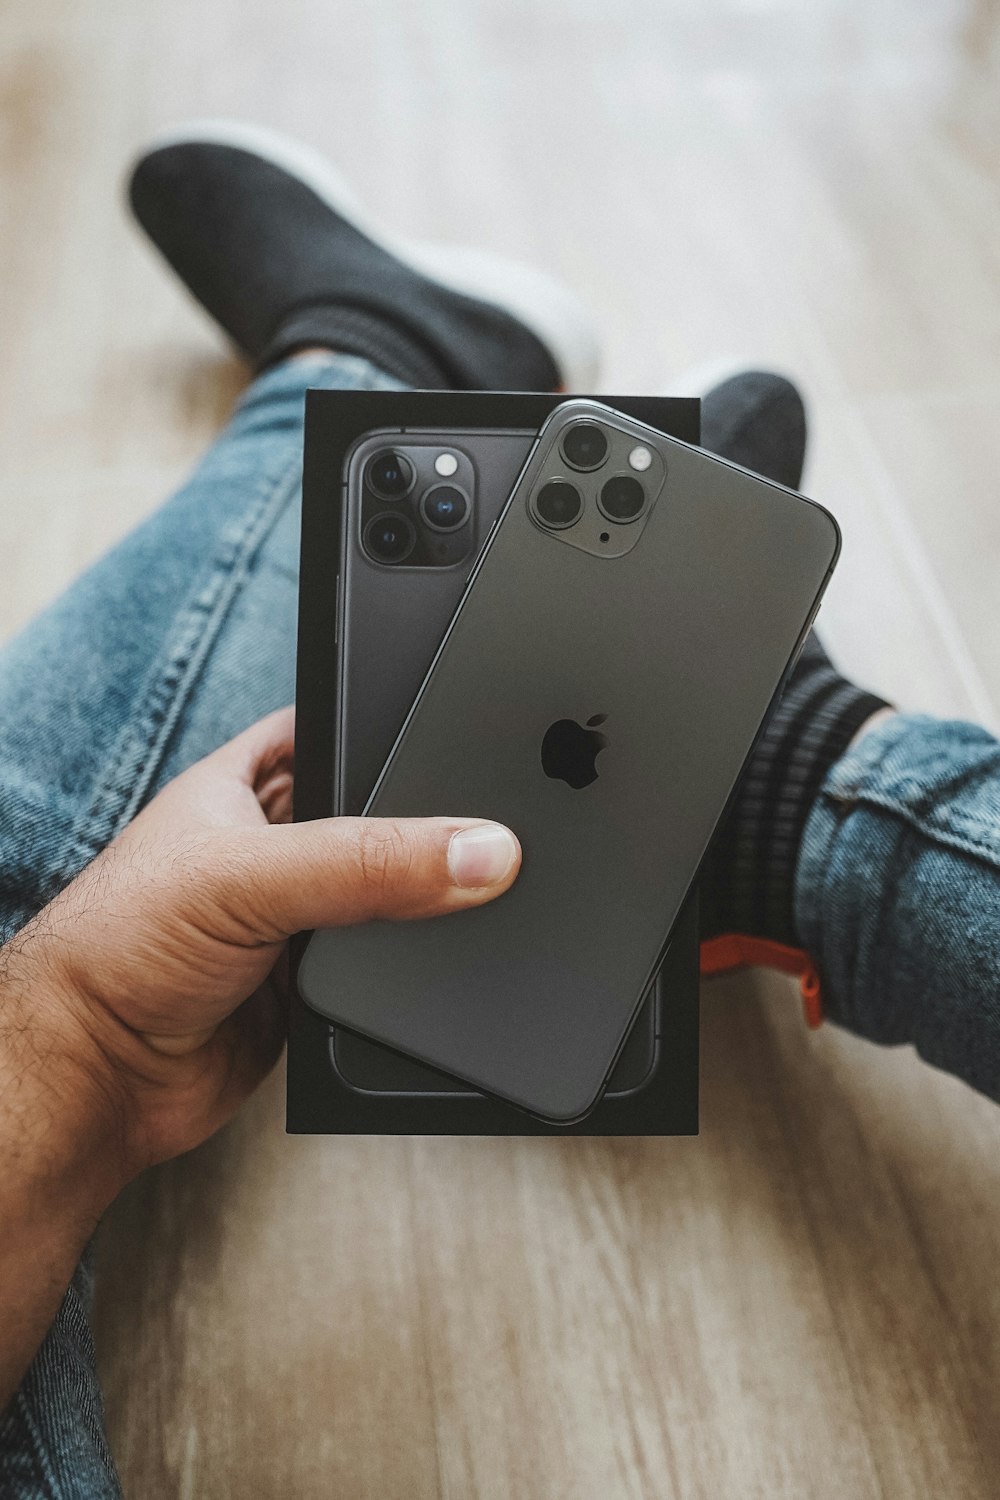 Iphone 7 Plus Pictures  Download Free Images on Unsplash